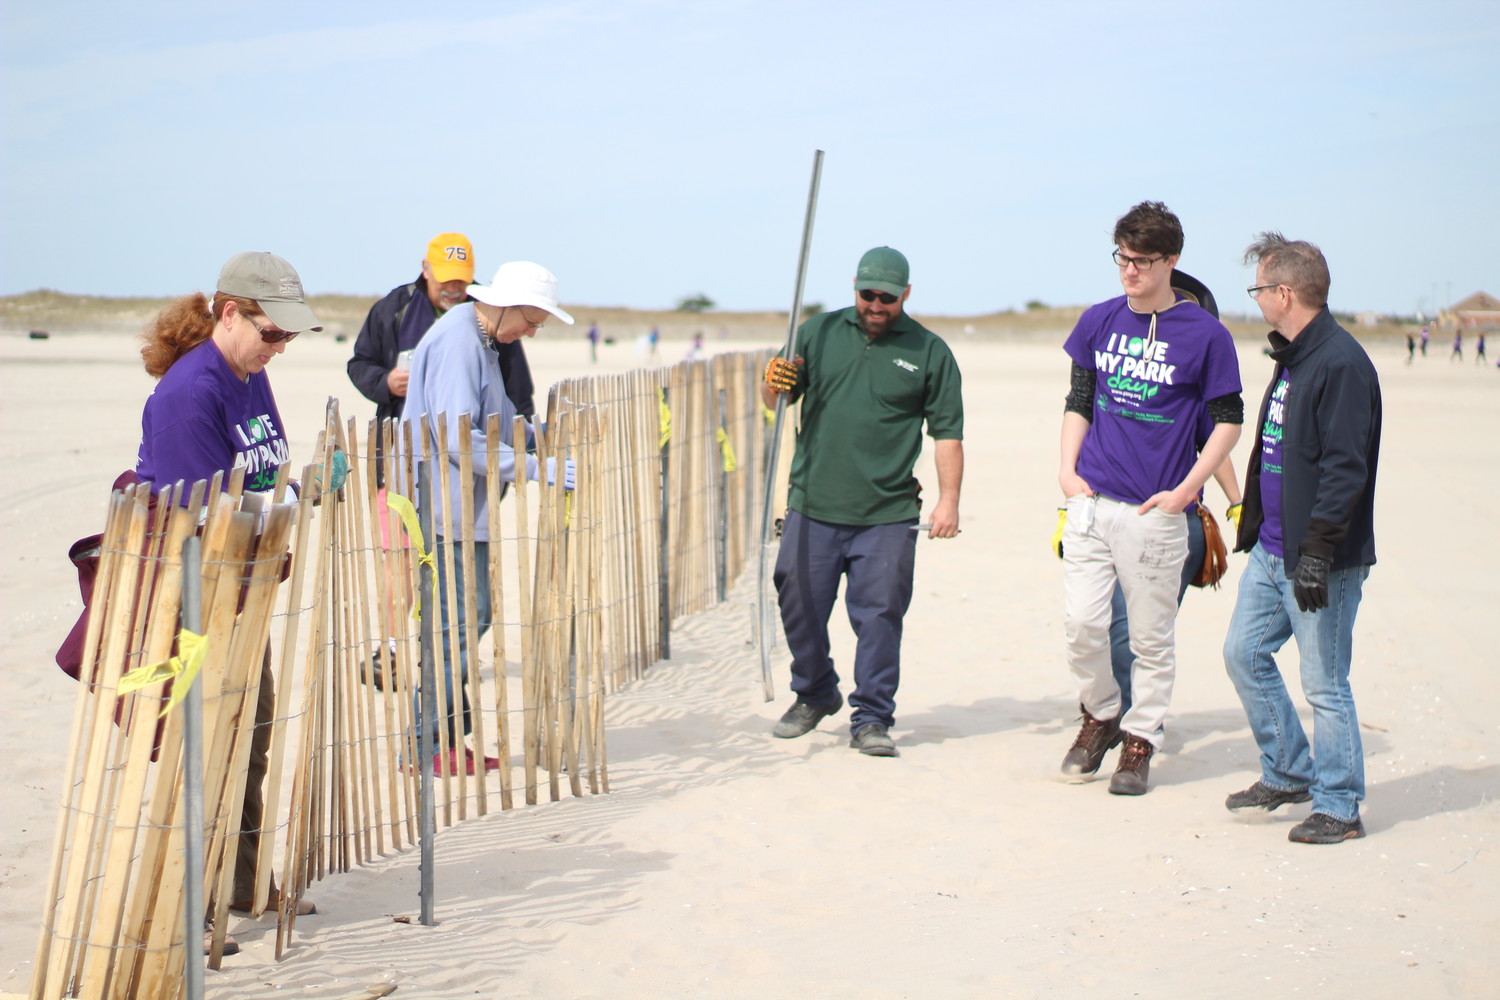 Jones Beach State Park supervisors and volunteers set up snow fencing, which is used to make sand dunes and creates an emergency lane for the upcoming air show.